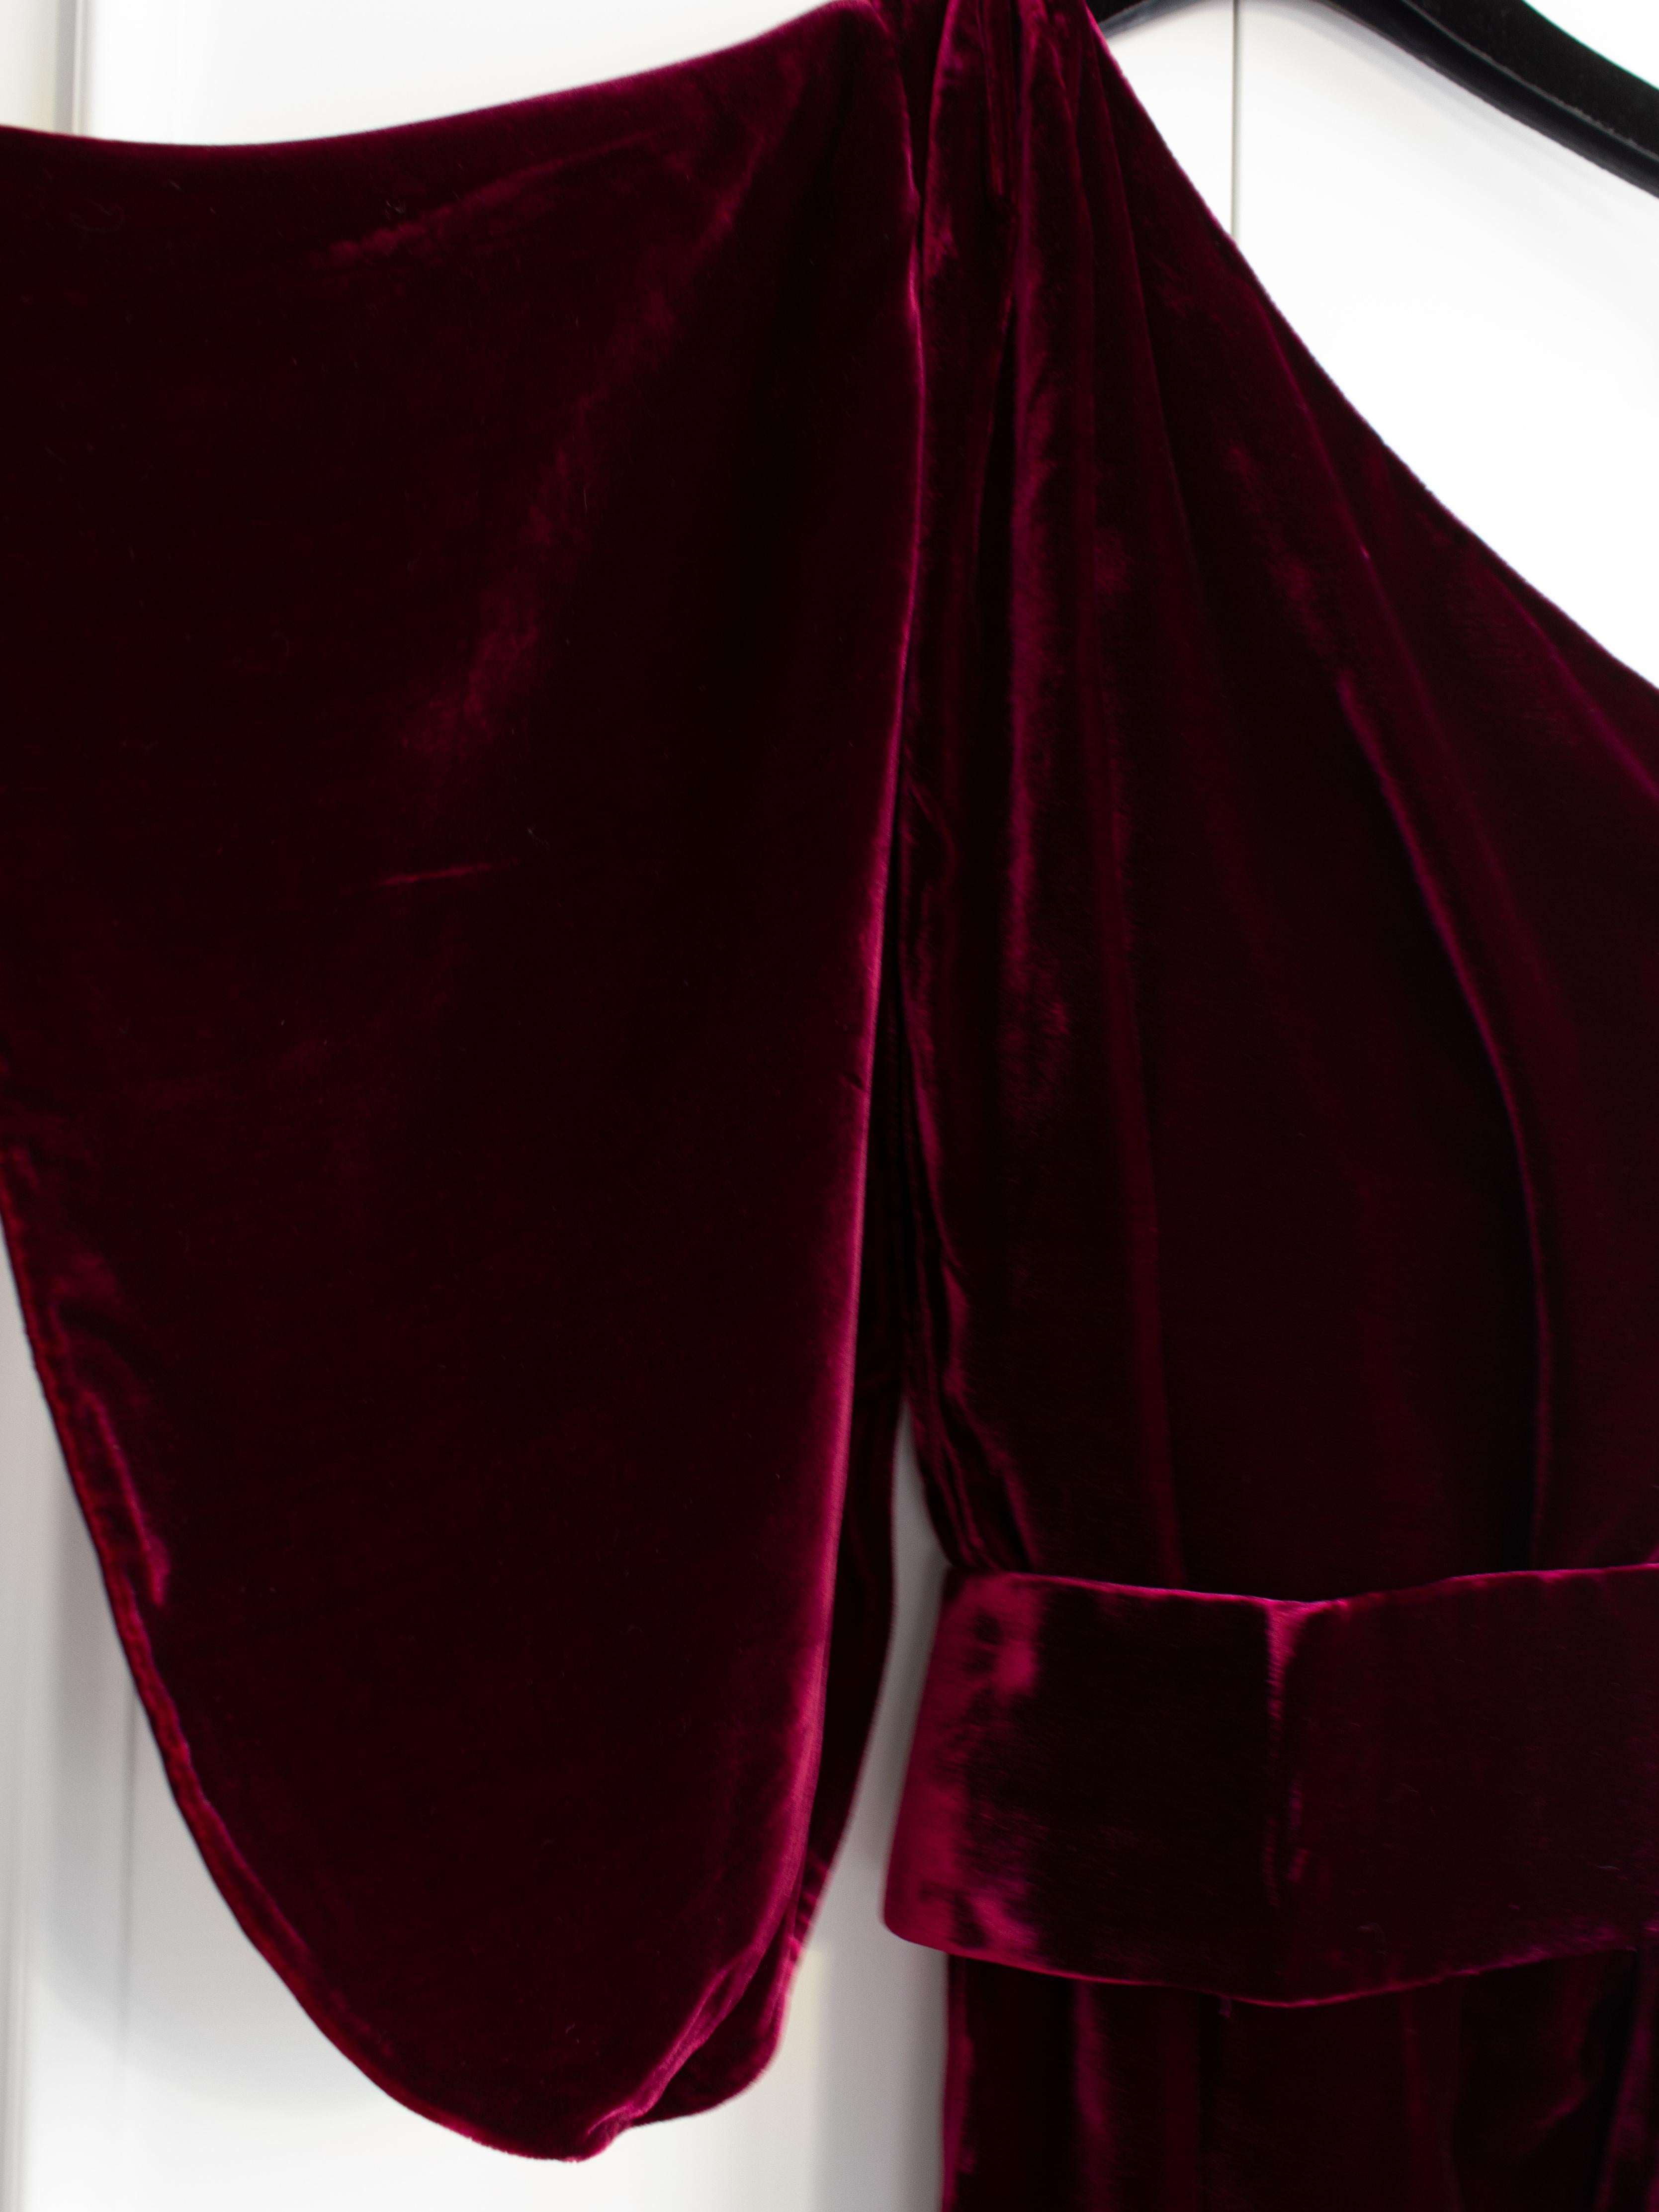 $6500 Ralph&Russo Red Carpet Lady Gaga Wine Red Burgundy Belted Velvet Ava Gown 10